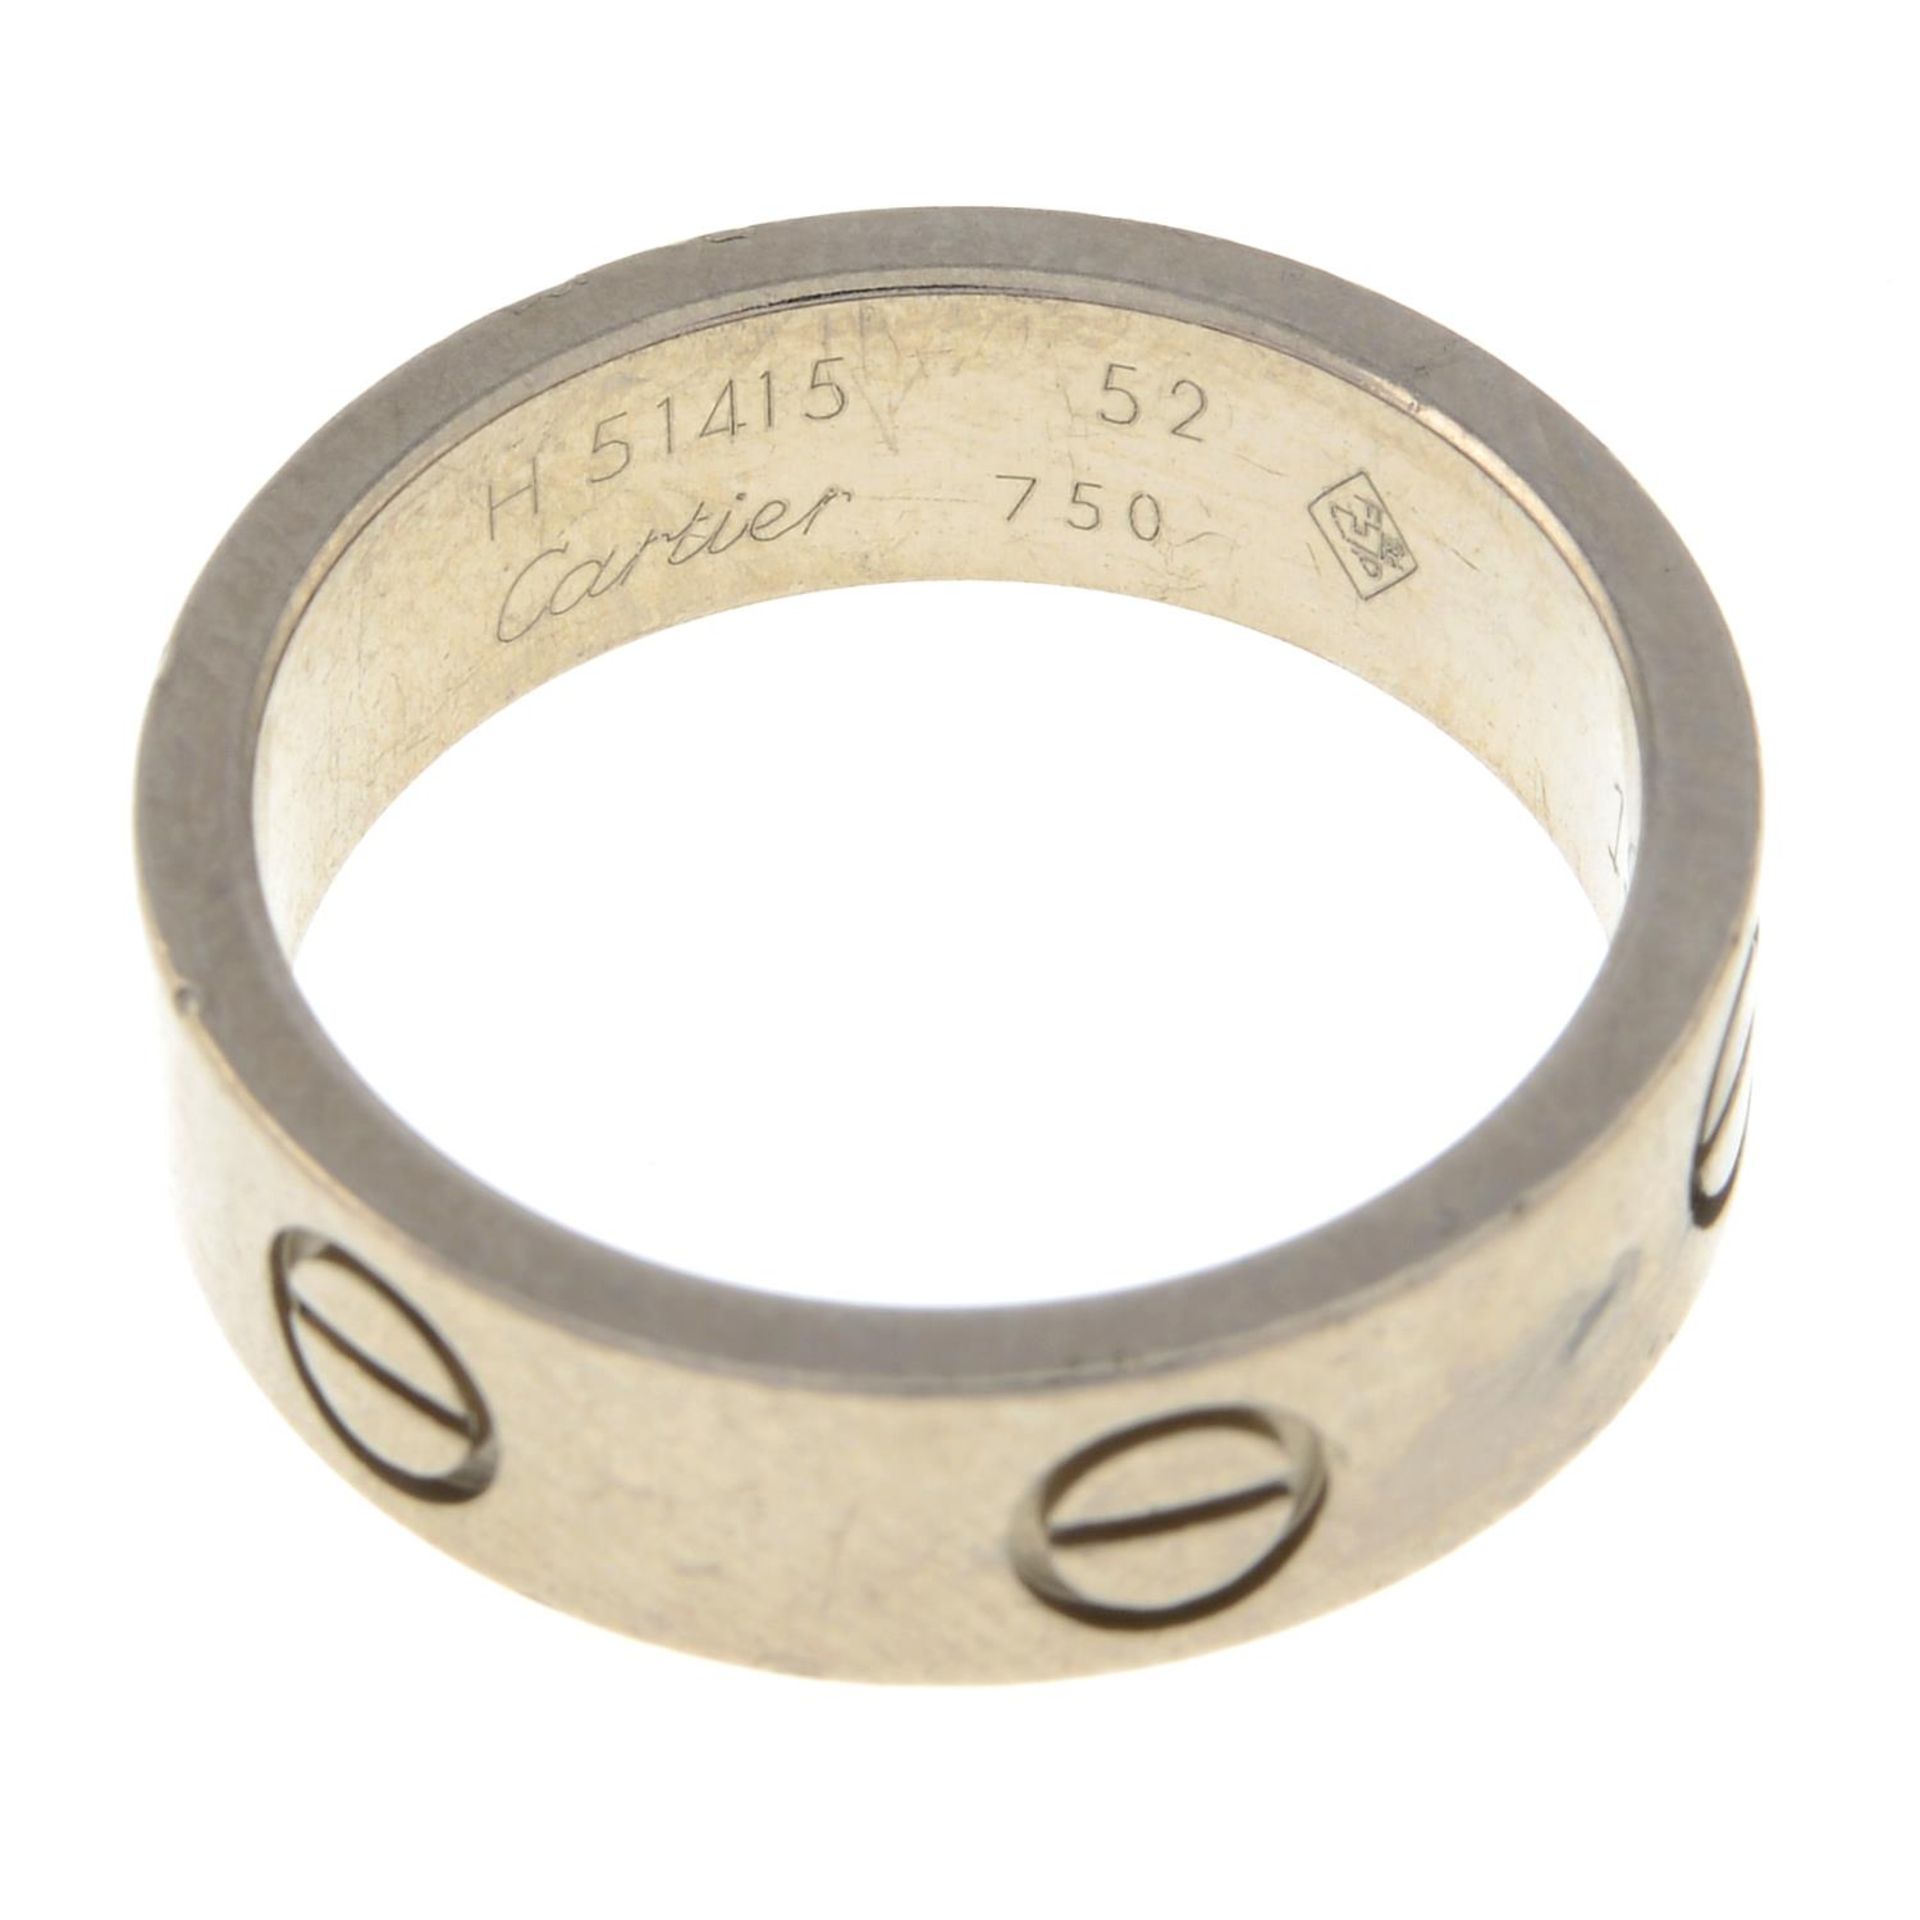 CARTIER - A 'Love' ring.Stamped 750. - Image 2 of 2